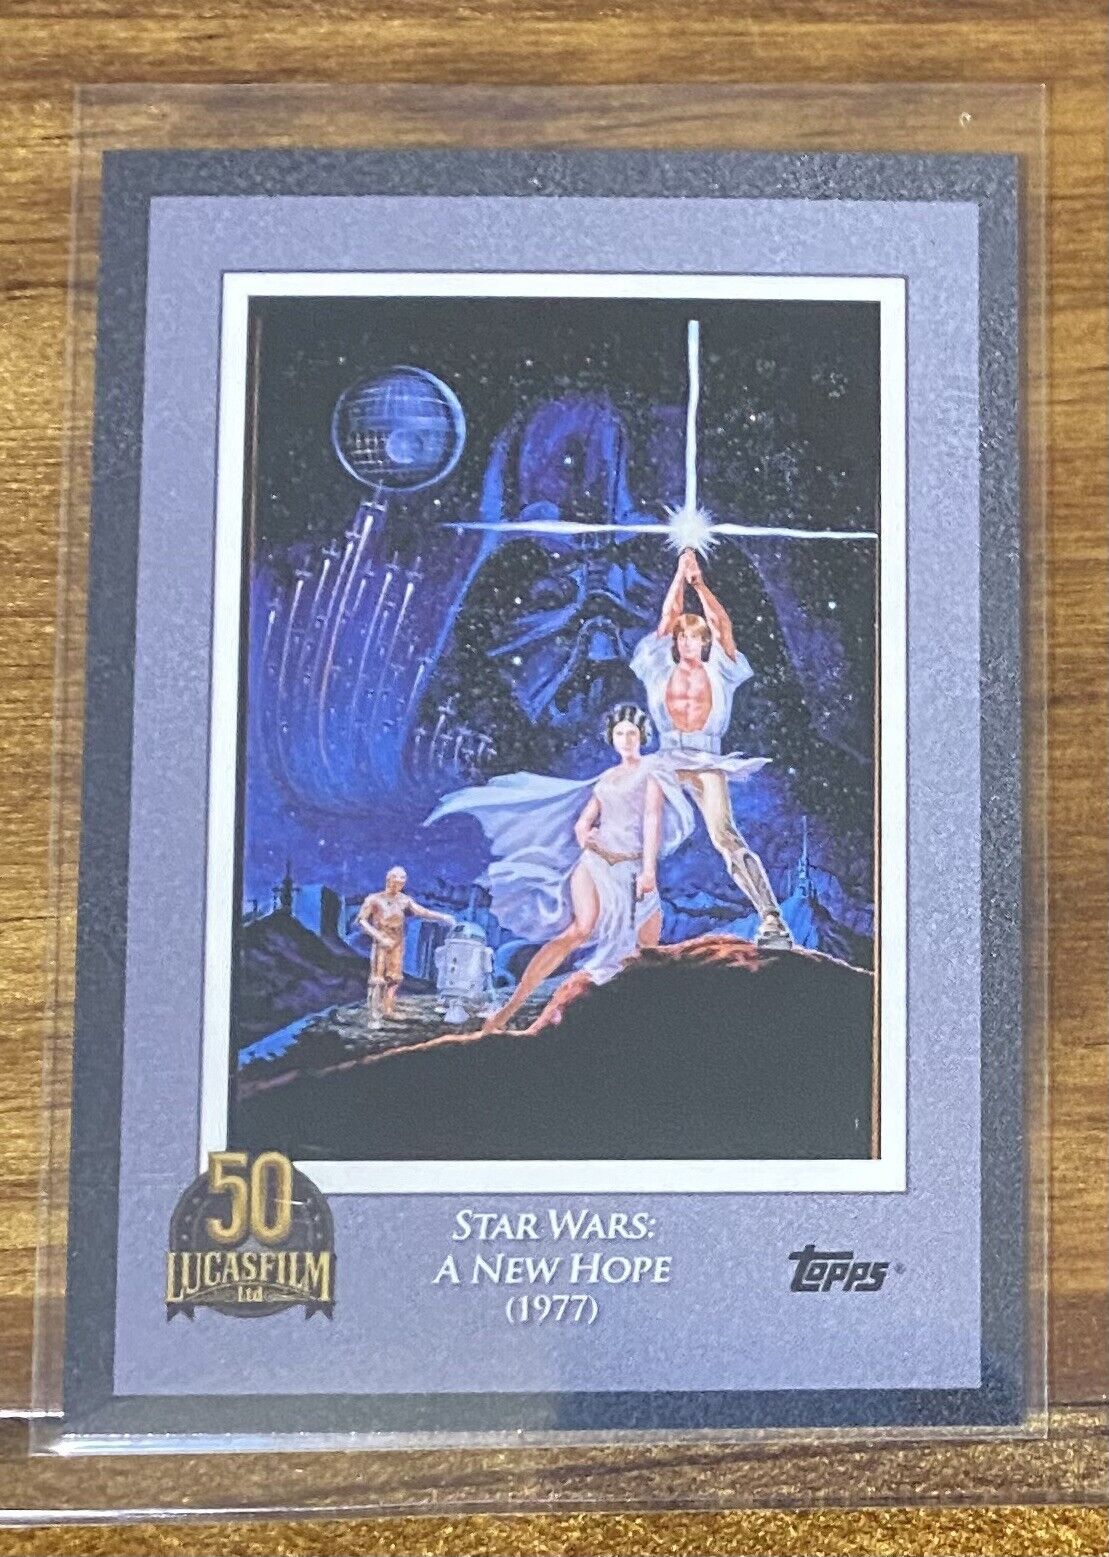 2021 Topps Star Wars Lucasfilm 50th Card #1 - A New Hope (1977) Base Card